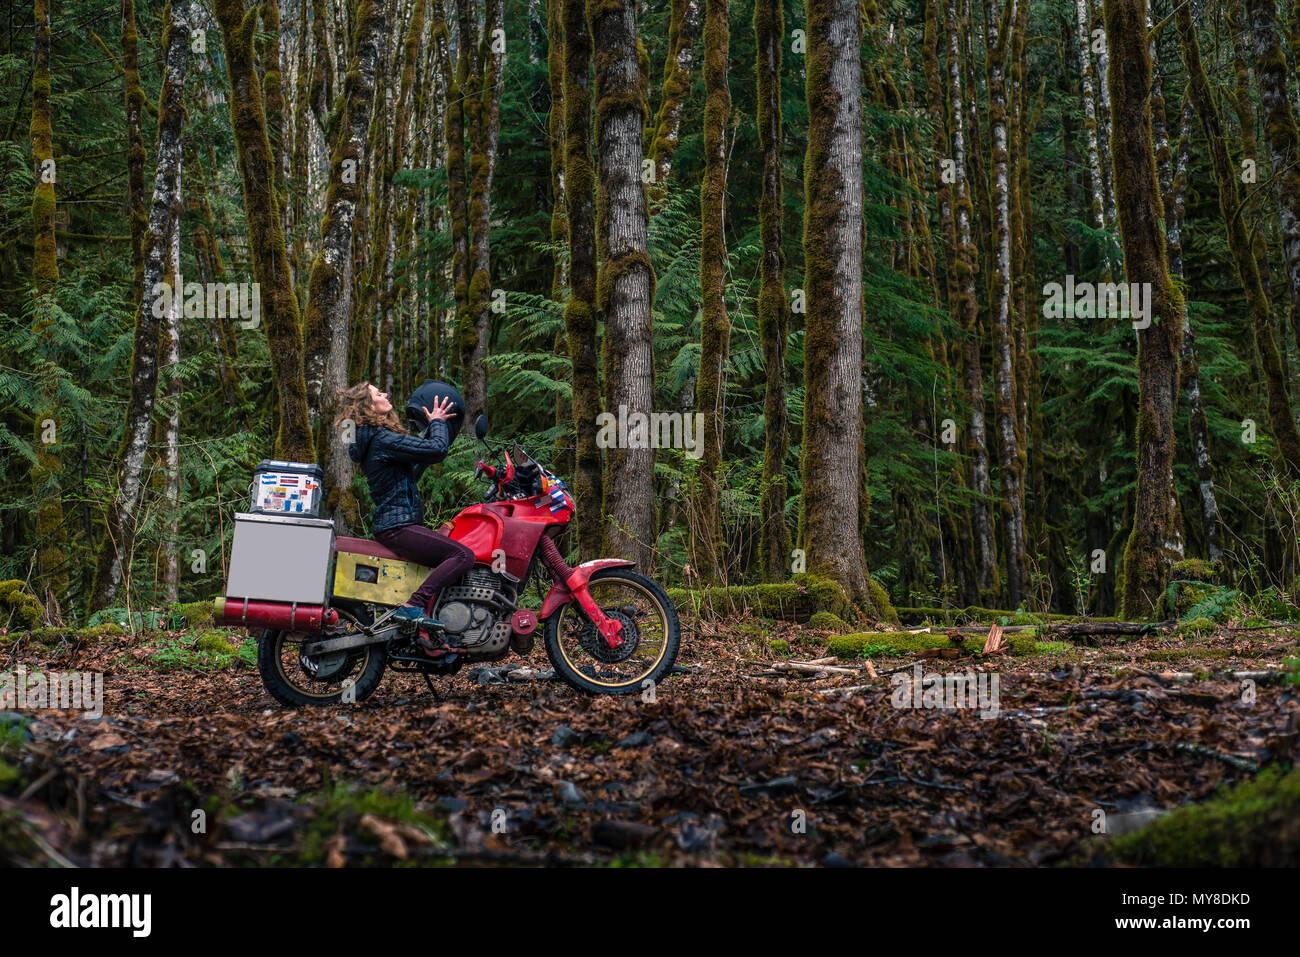 Woman riding in forest, Squamish, Canada Banque D'Images